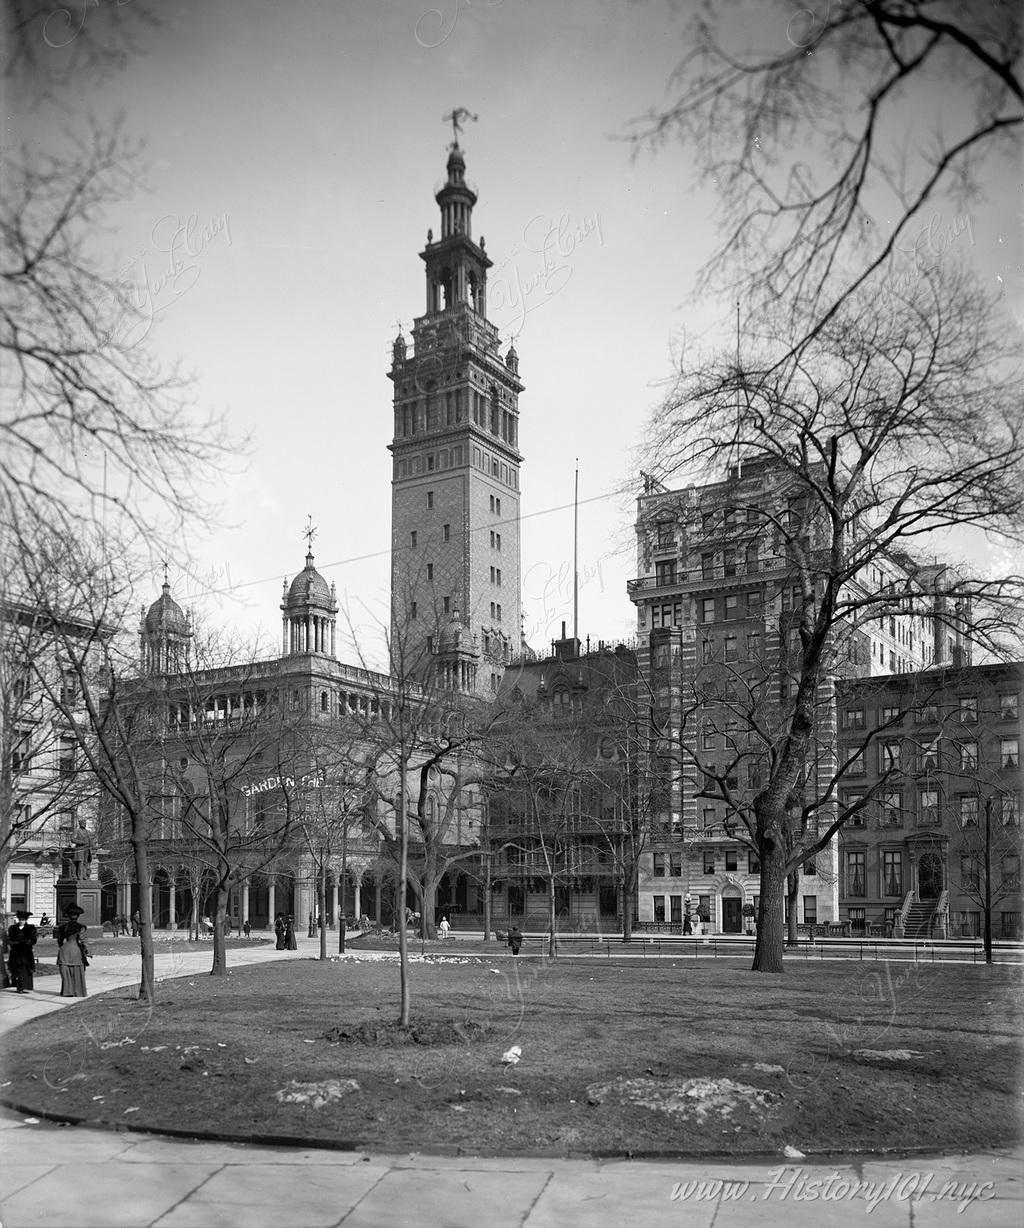 Discover the 1910 Madison Square Garden, a symbol of NYC's architectural and cultural evolution at the heart of Manhattan